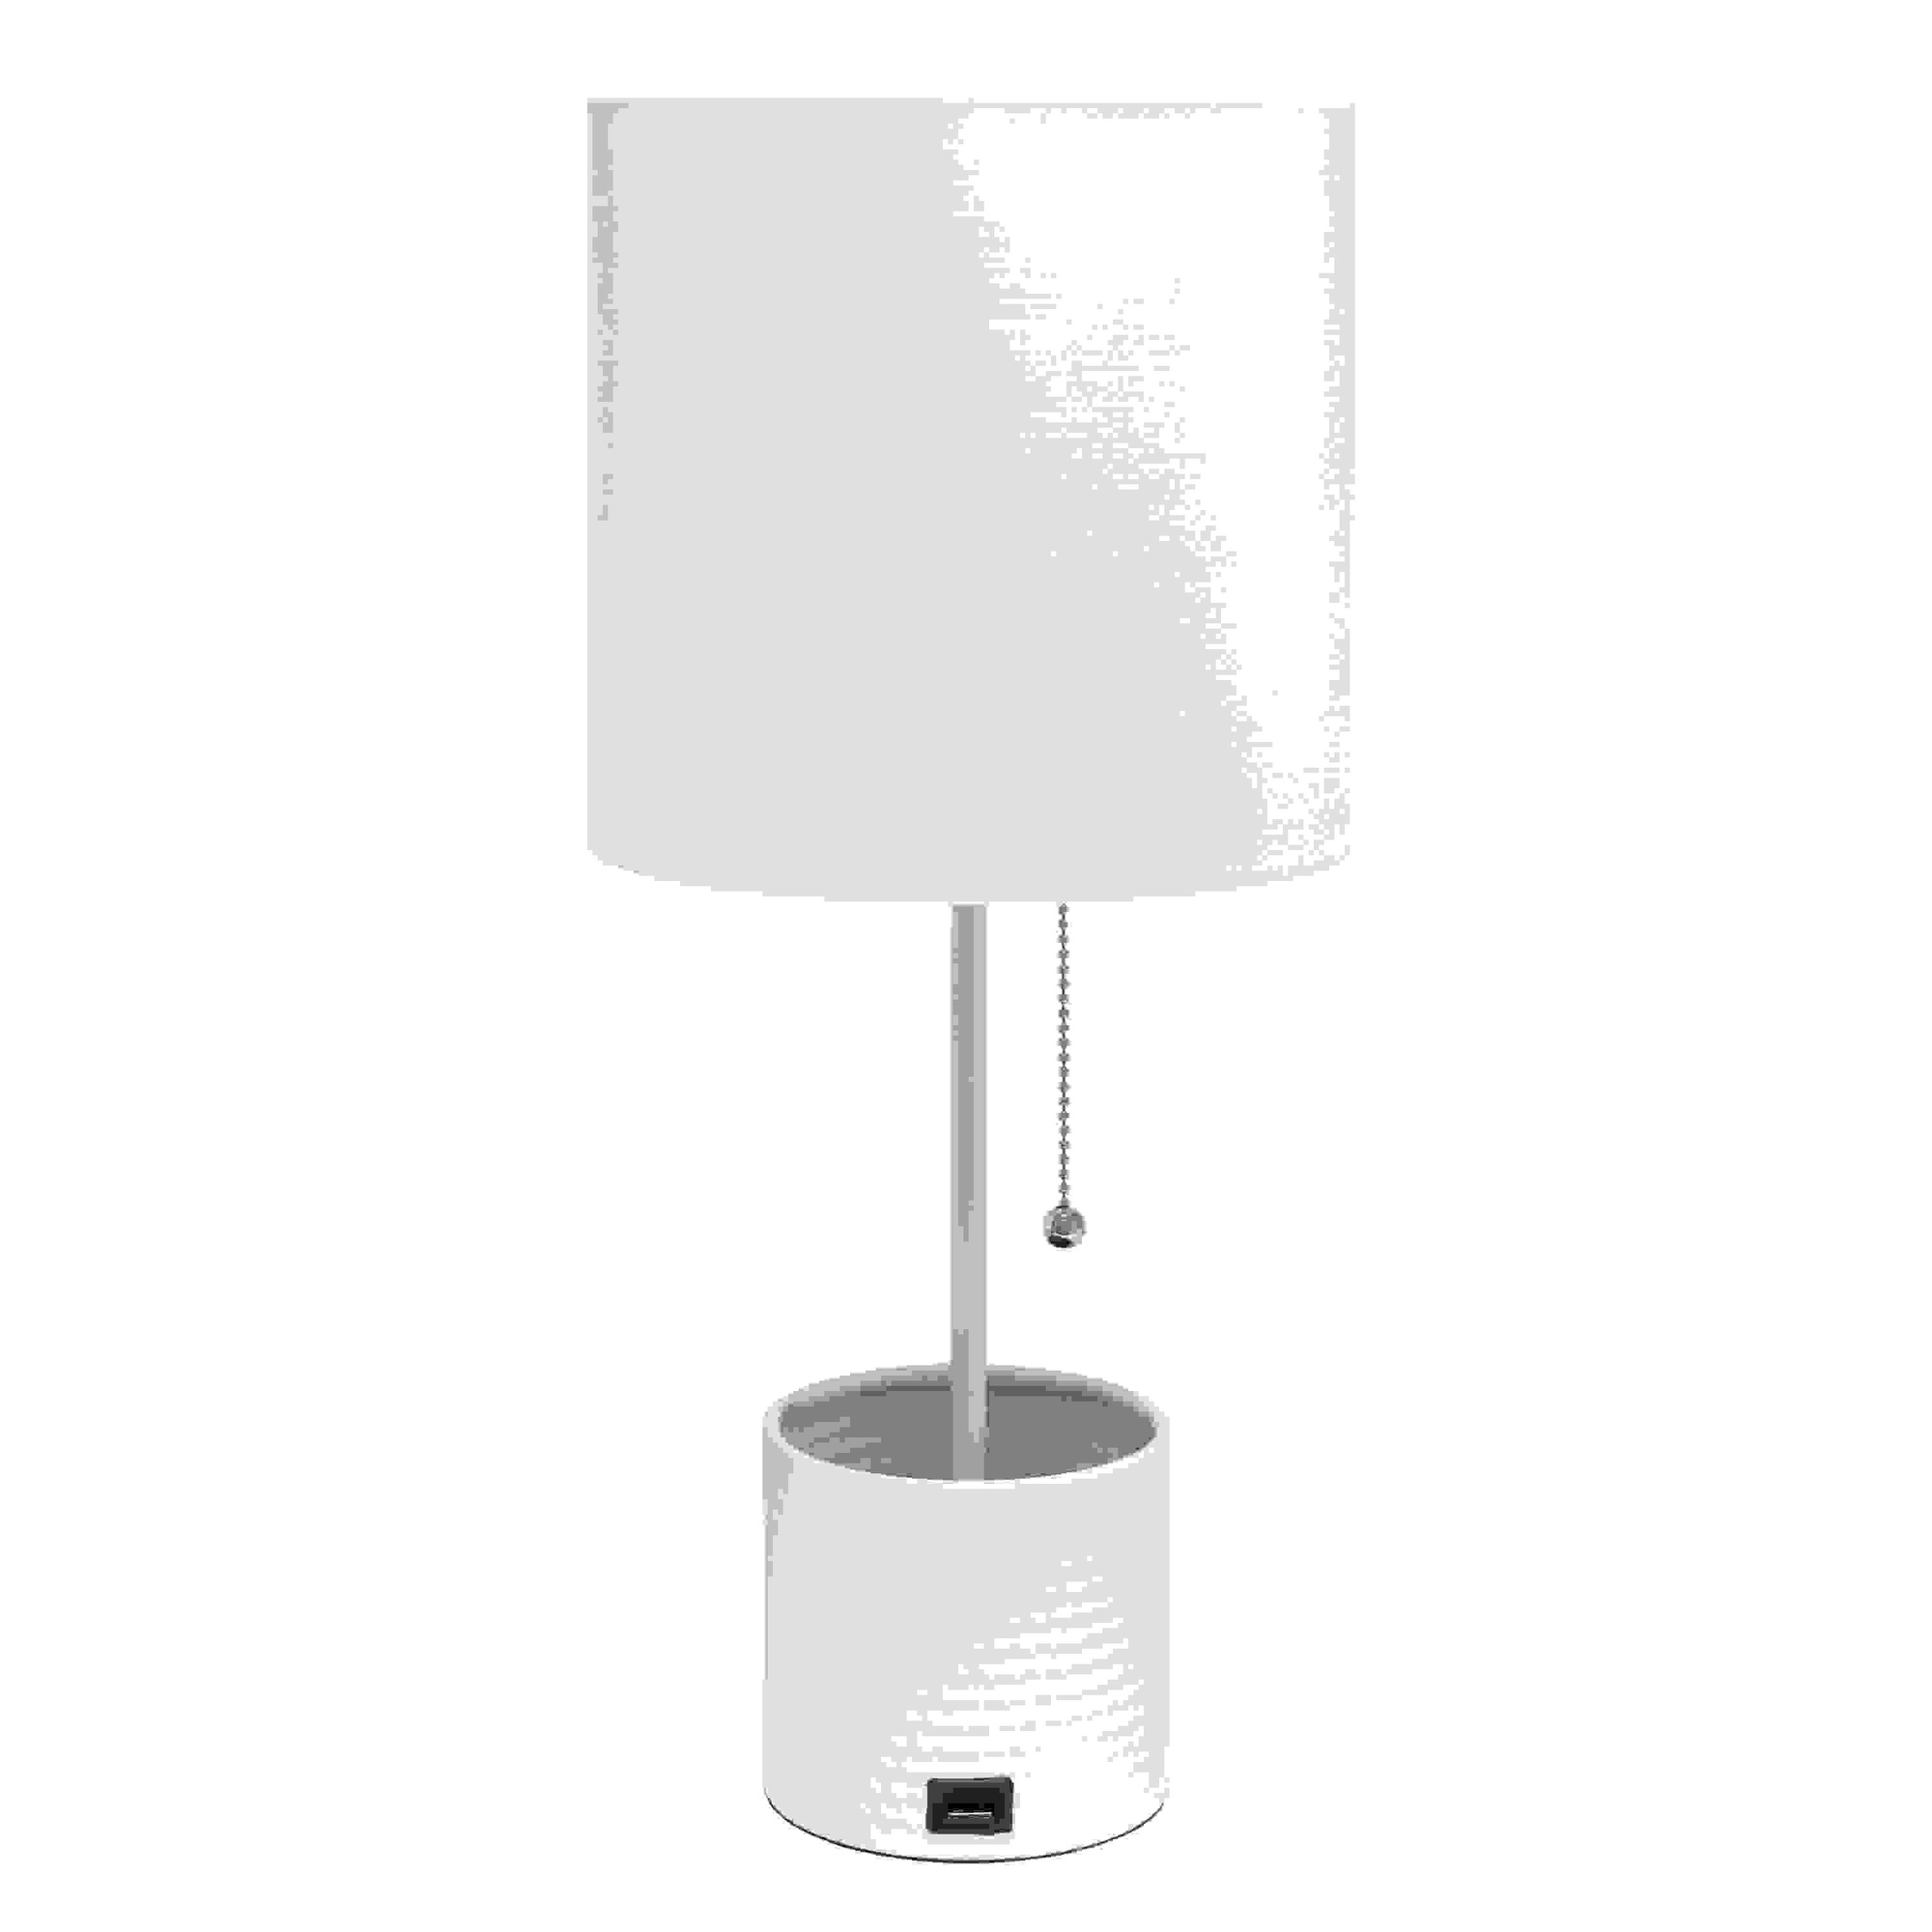 Simple Designs Hammered Metal Organizer Table Lamp with USB charging port and Fabric Shade, White